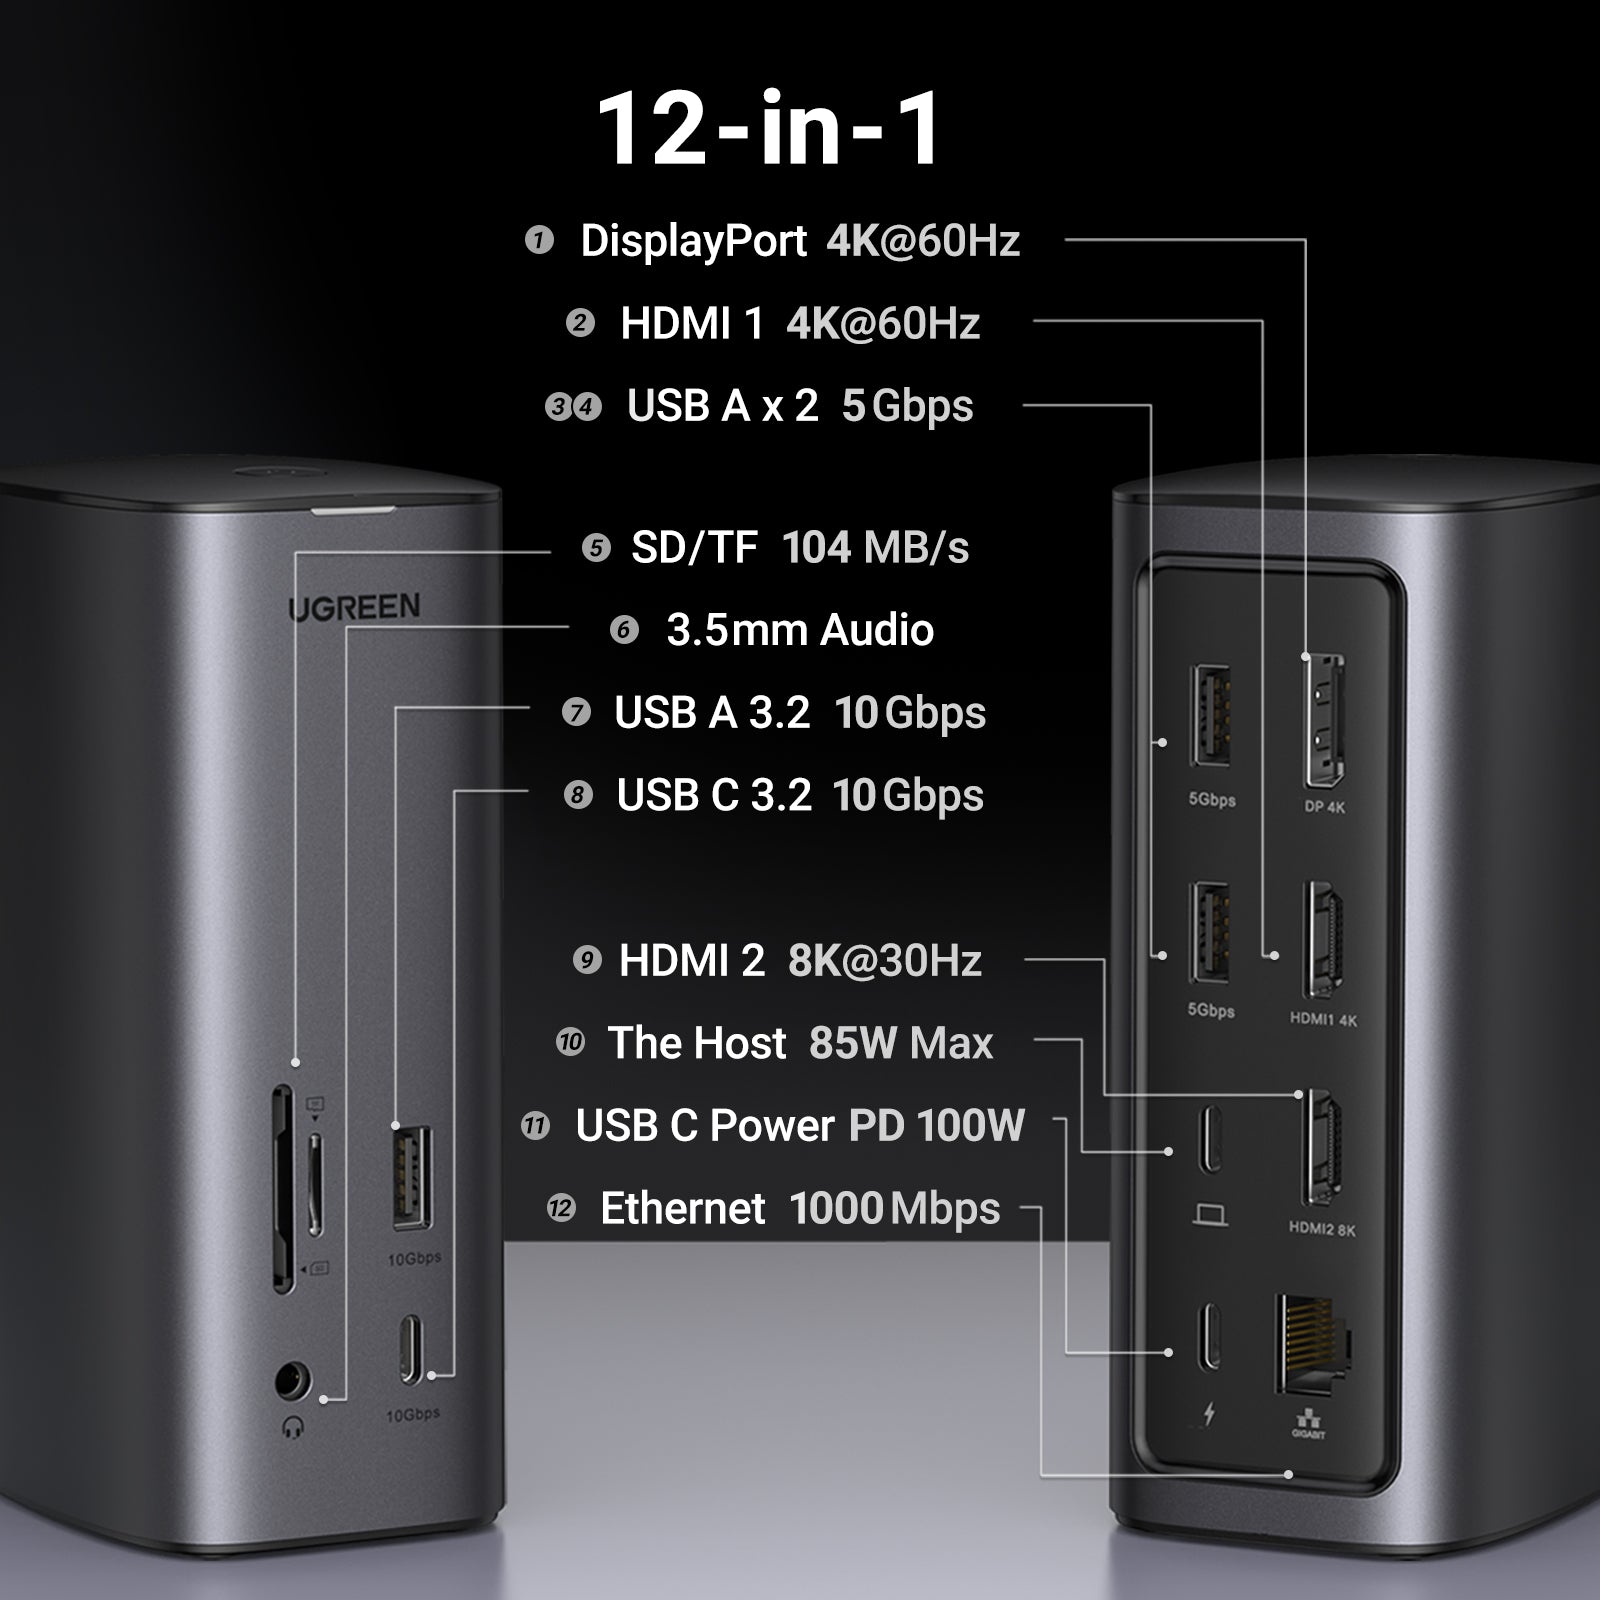 Anker 332 latest compact 5-in-1 USB-C hub with 4K HDMI port launches -   News